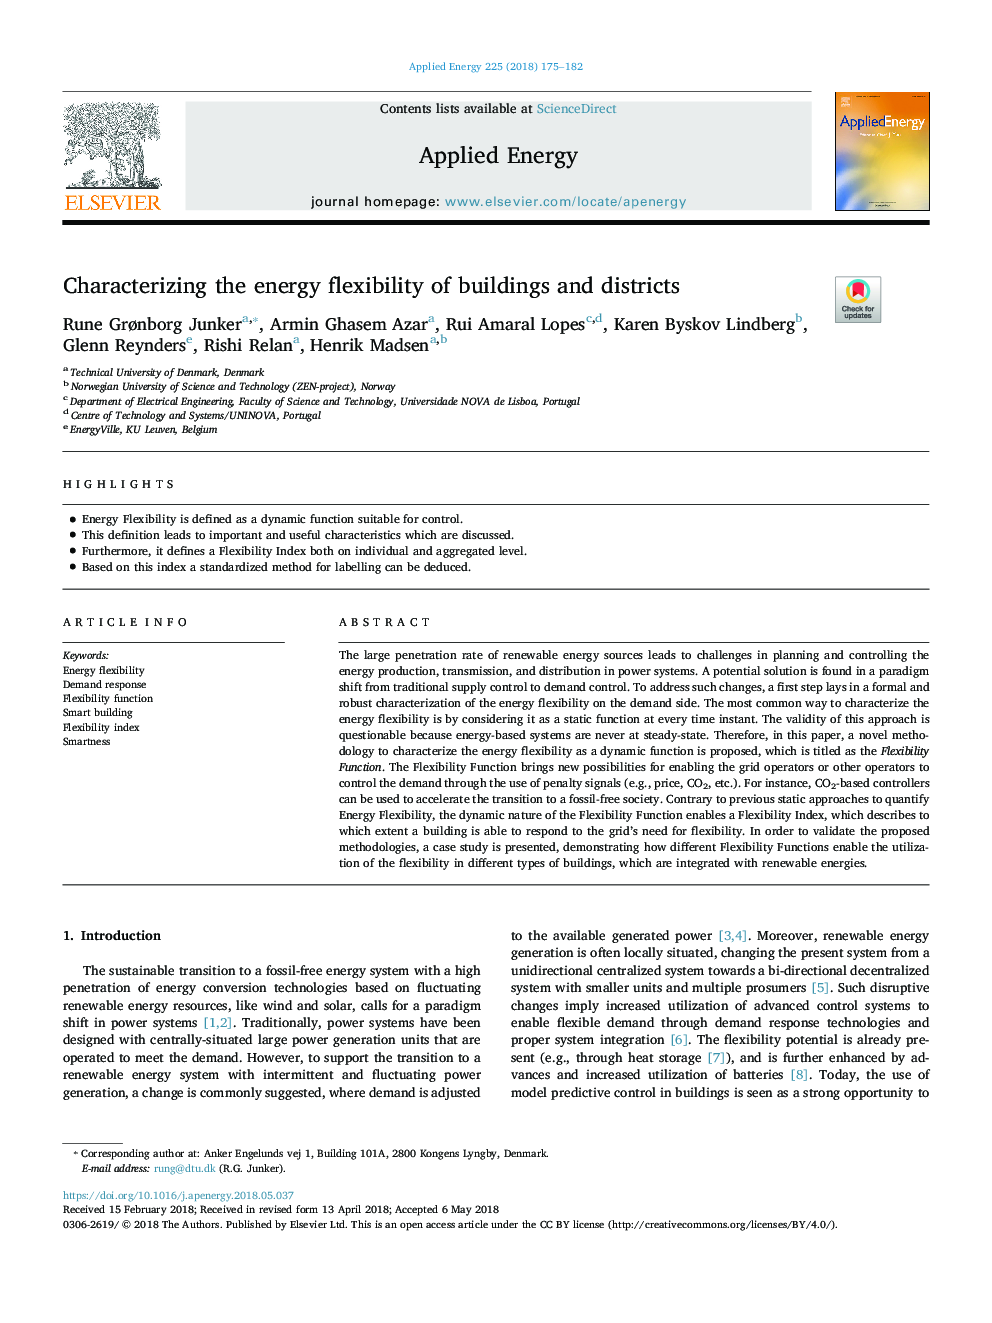 Characterizing the energy flexibility of buildings and districts